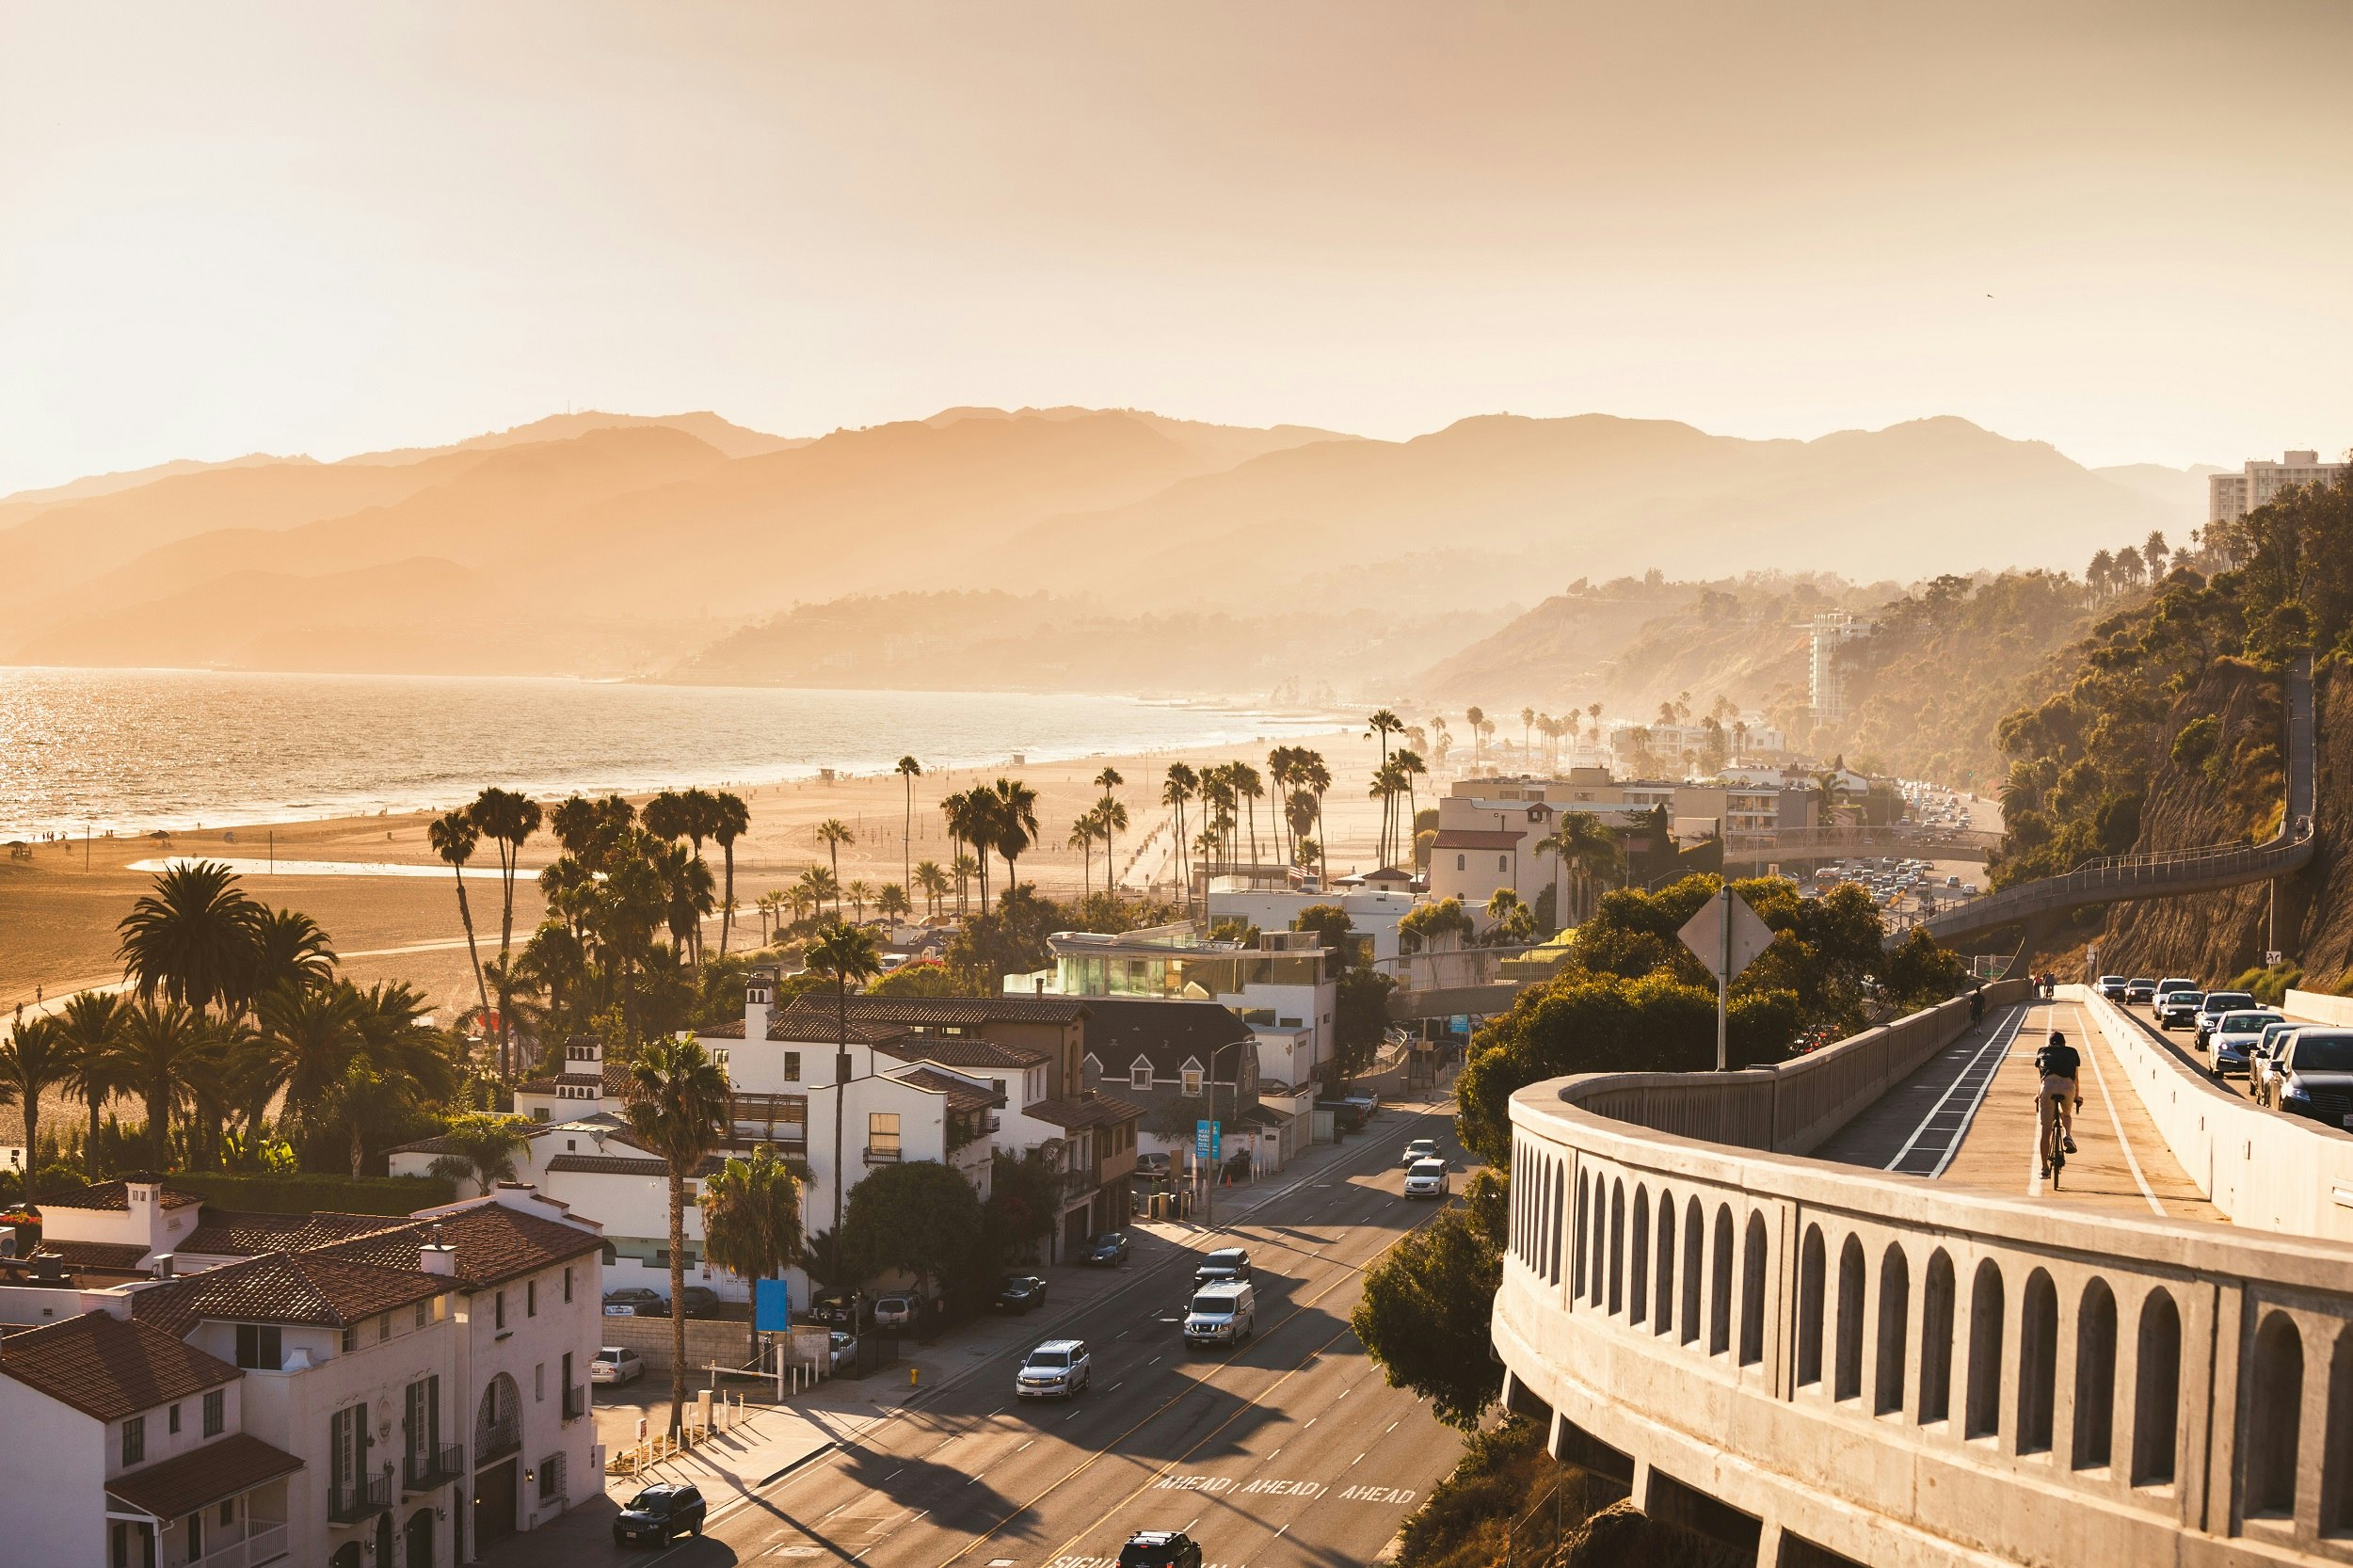 Bathed in golden light, this is an image of the beach at Santa Monica; in the foreground are palm-lined streets.